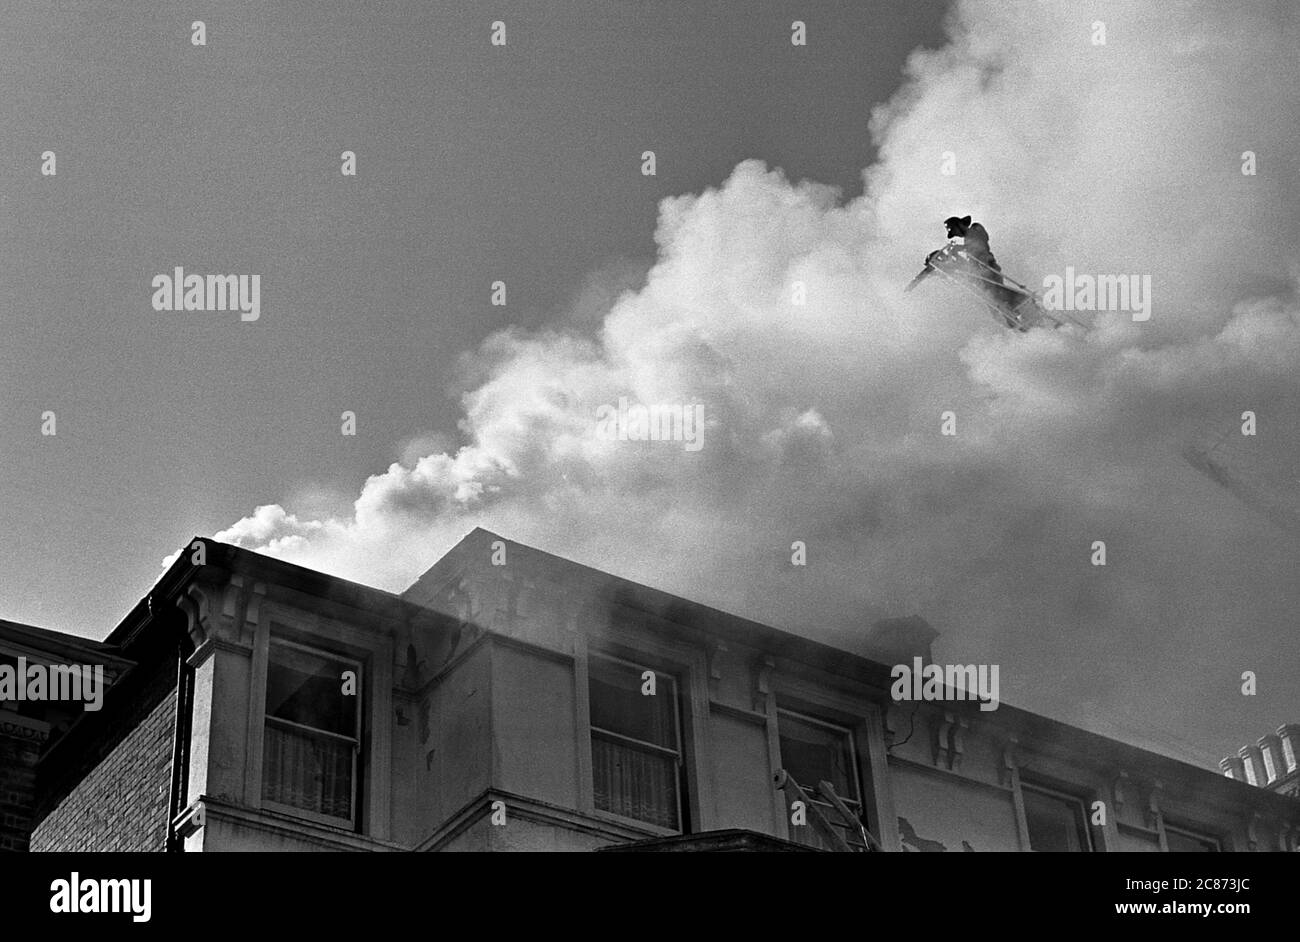 AJAXNETPHOTO. 7TH MARCH, 1969. SOUTHSEA, PORTSMOUTH, ENGLAND. - HOTEL FIRE - FIREMAN ATOP A TURNTABLE LADDER PARTLY OBSCURED BY SMOKE, POURS WATER INTO THE BLAZING ROOF OF THE HEREFORD HOTEL IN KENT ROAD. OCCUPANTS OF THE HOTEL WERE SAFELY EVACUATED AND THERE WERE NO CASUALTIES.PHOTO:JONATHAN EASTLAND/AJAX REF:202206 24 Stock Photo